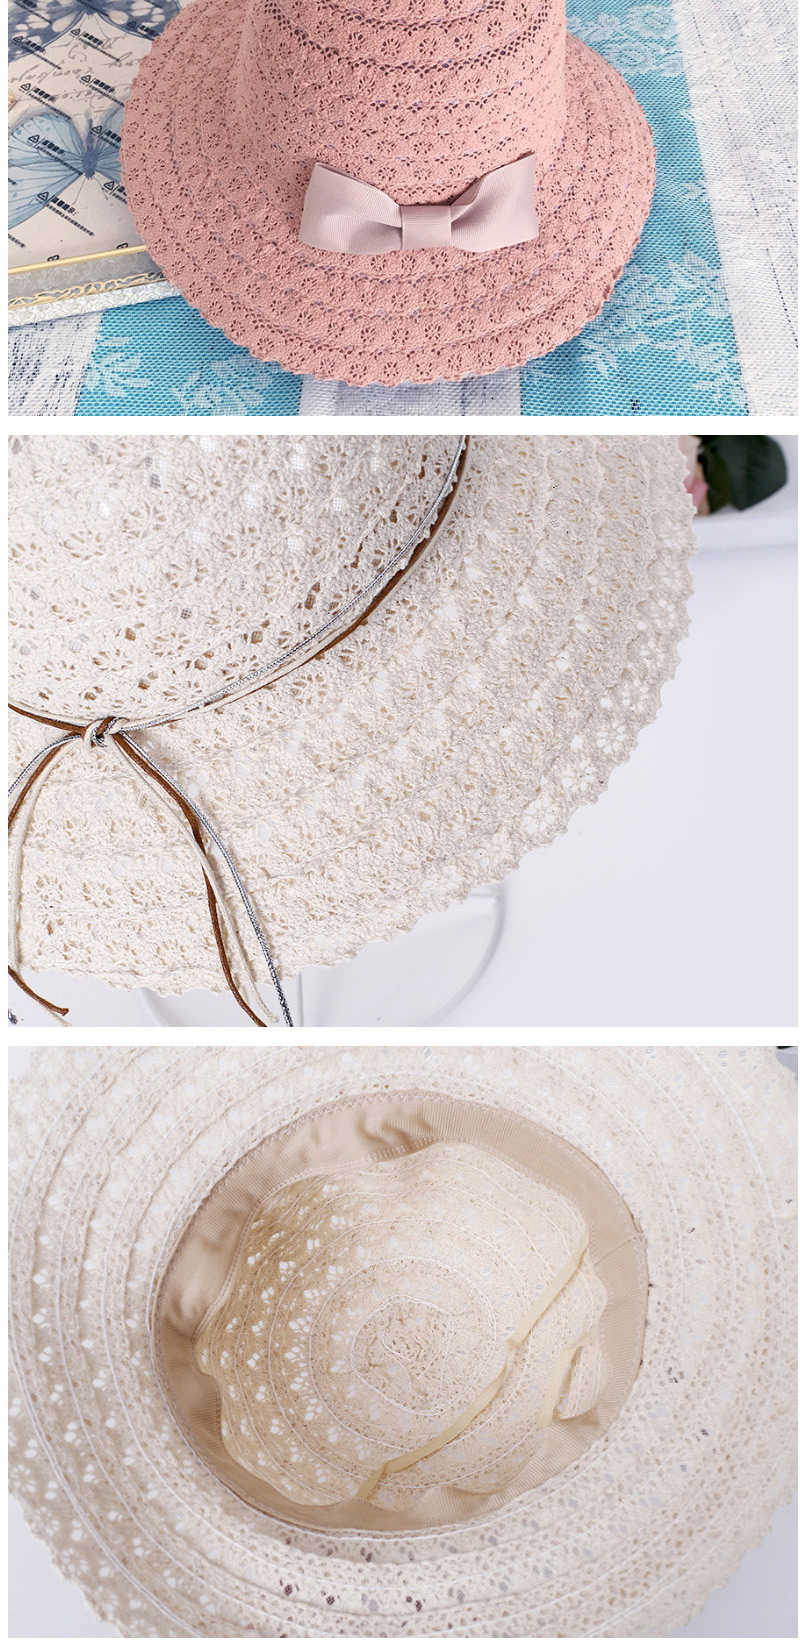 Fashion White Hollow Out Design Bowknot Decorated Hat,Sun Hats